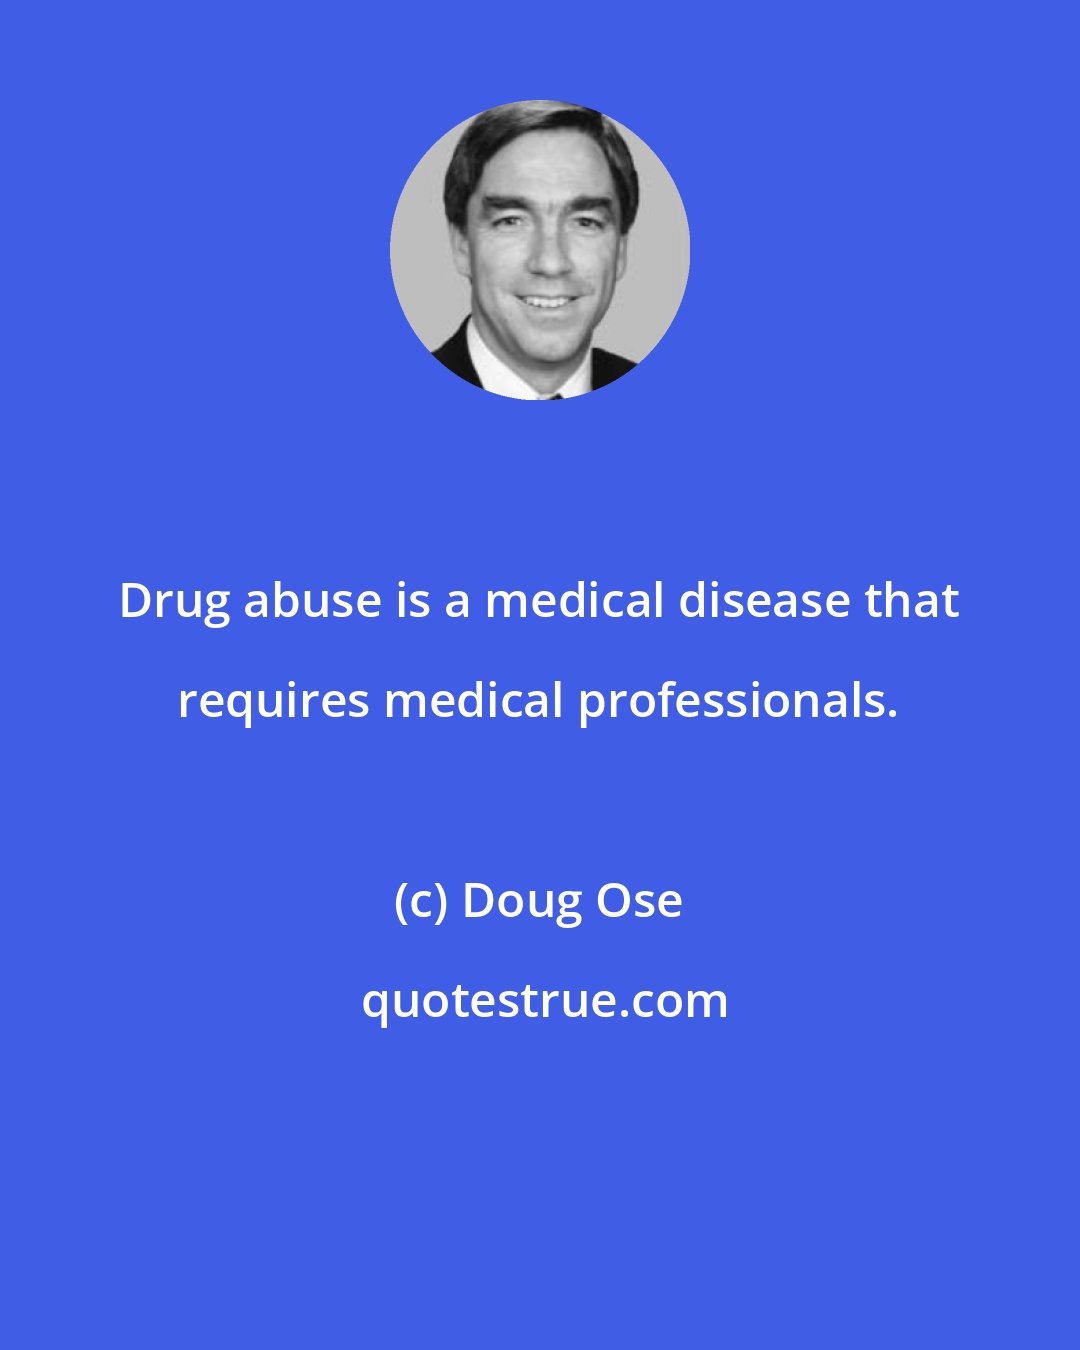 Doug Ose: Drug abuse is a medical disease that requires medical professionals.